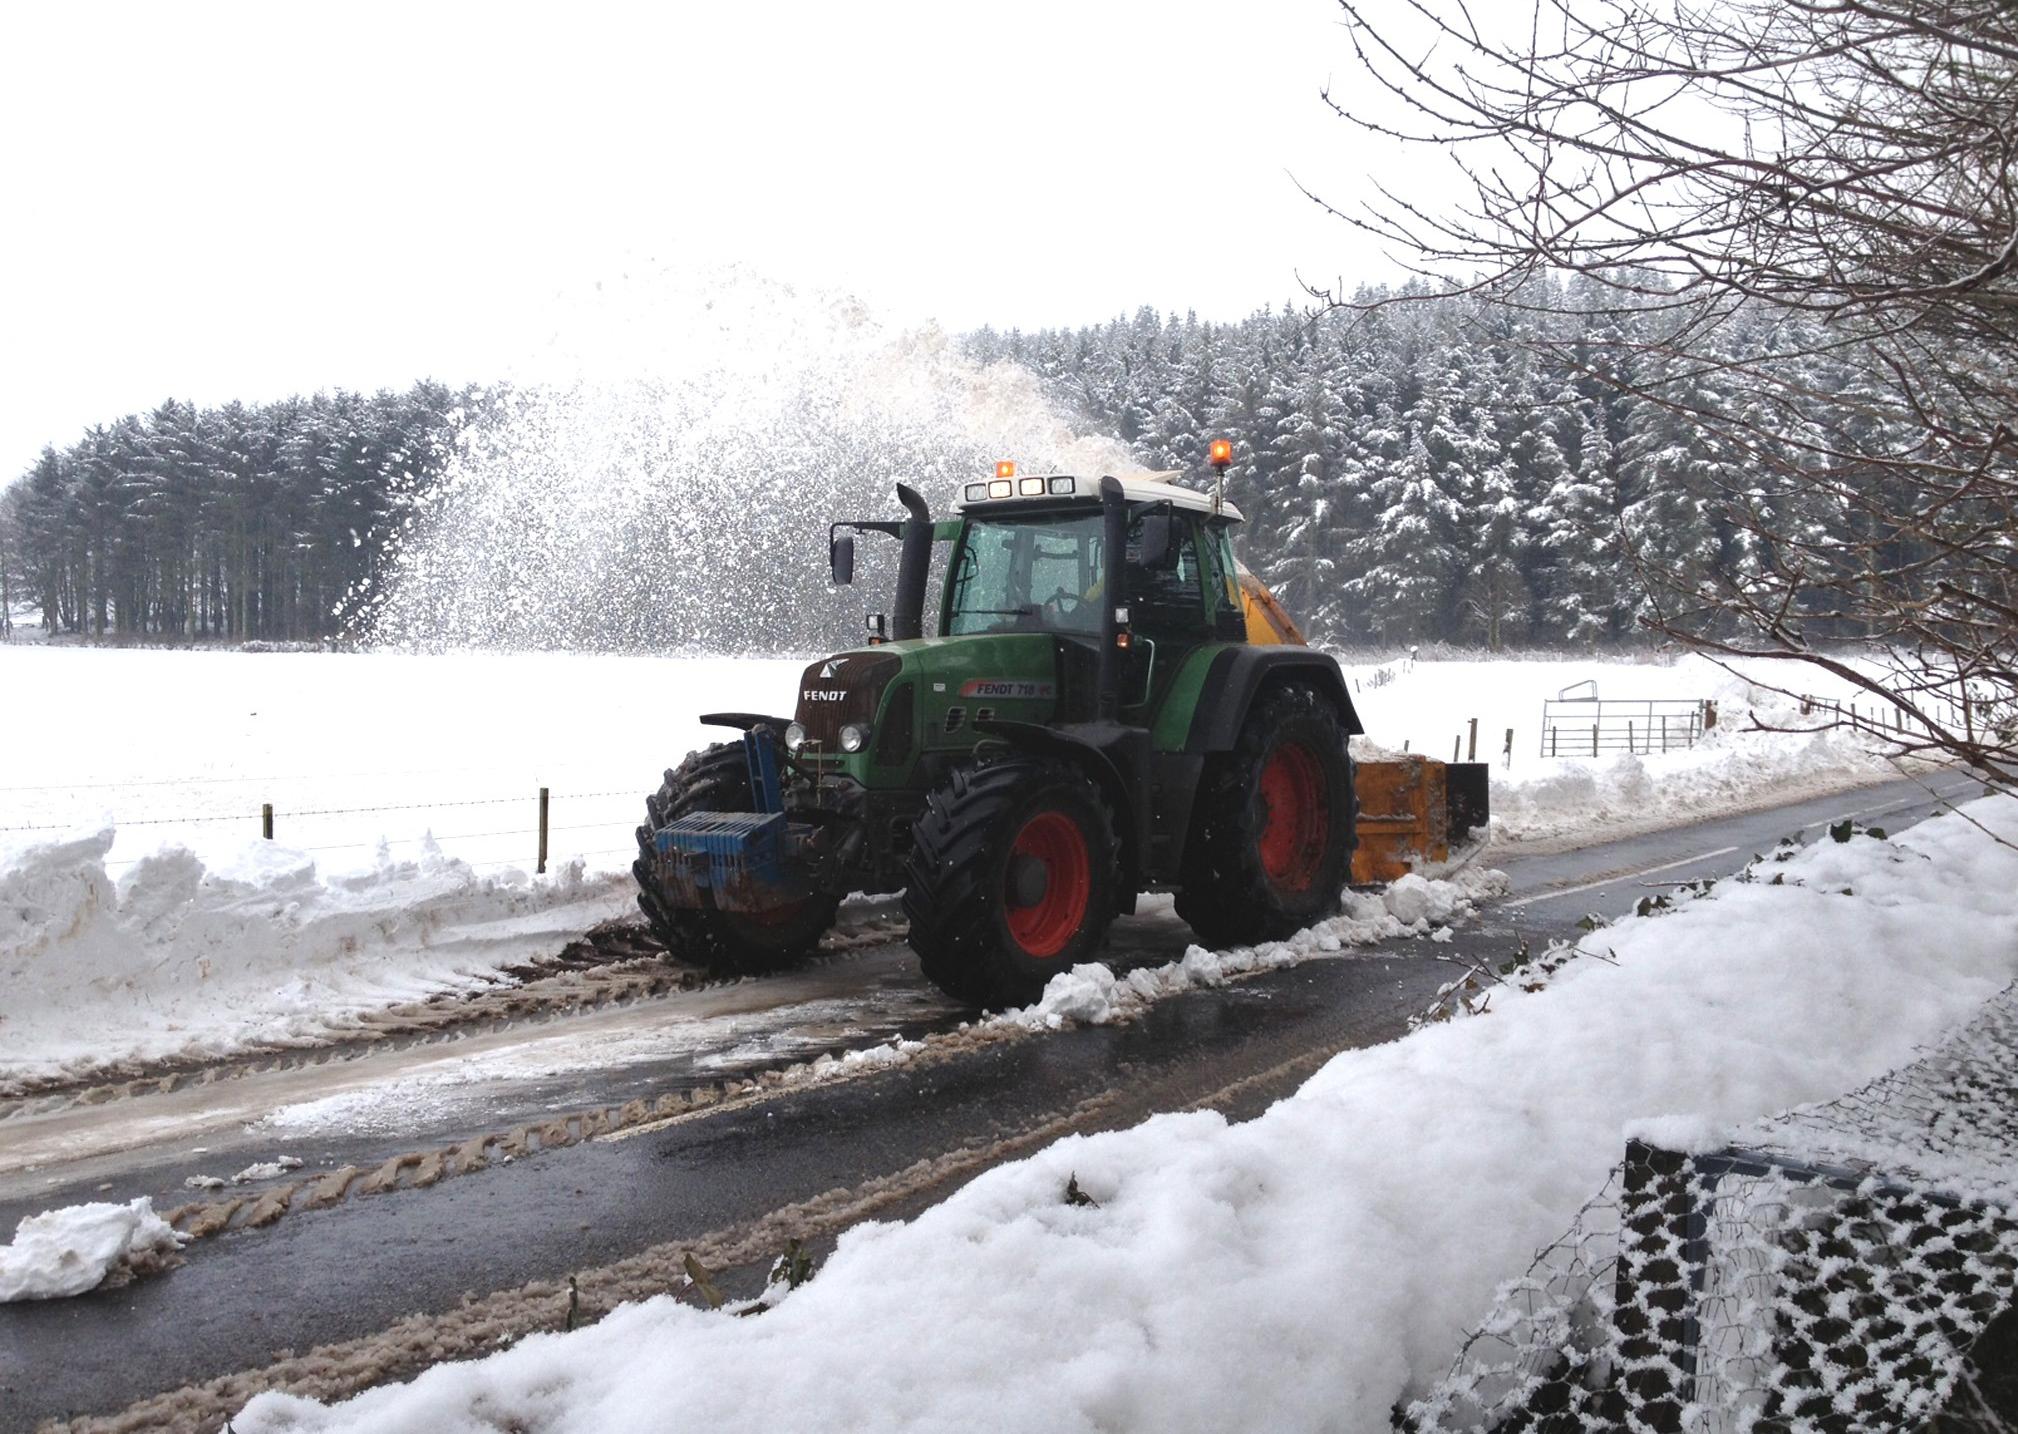 Snow Blower at Stichill in January 2013.